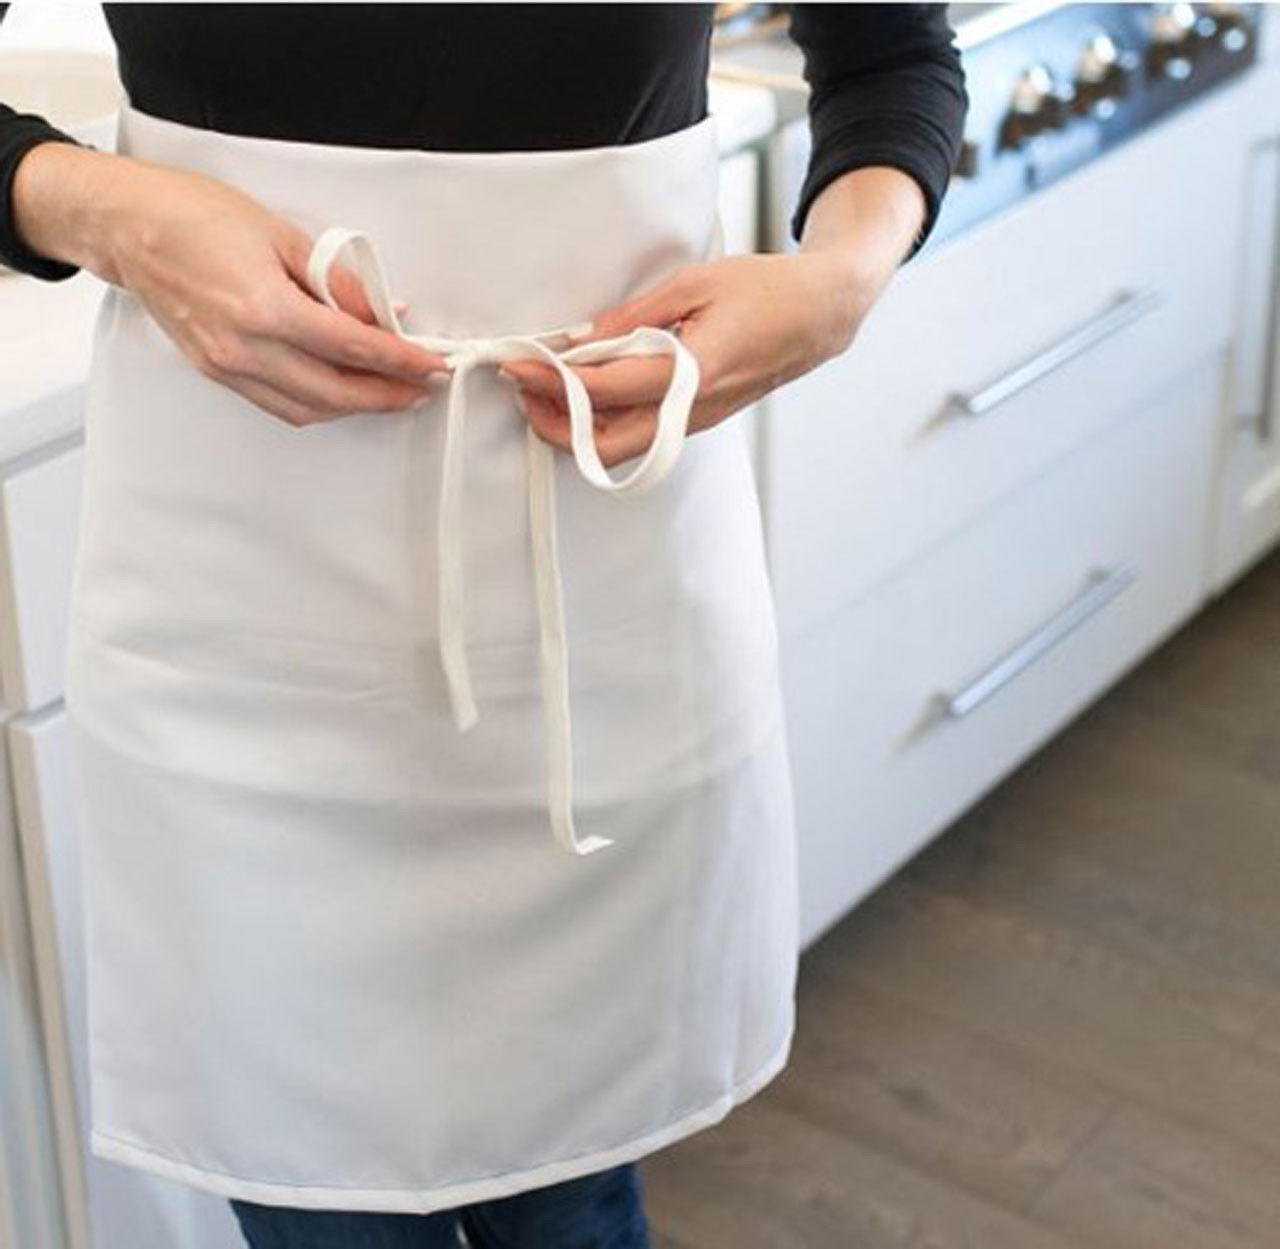 Before buying, can you tell me the dimensions of the 4-Way Reversible apron kitchen?